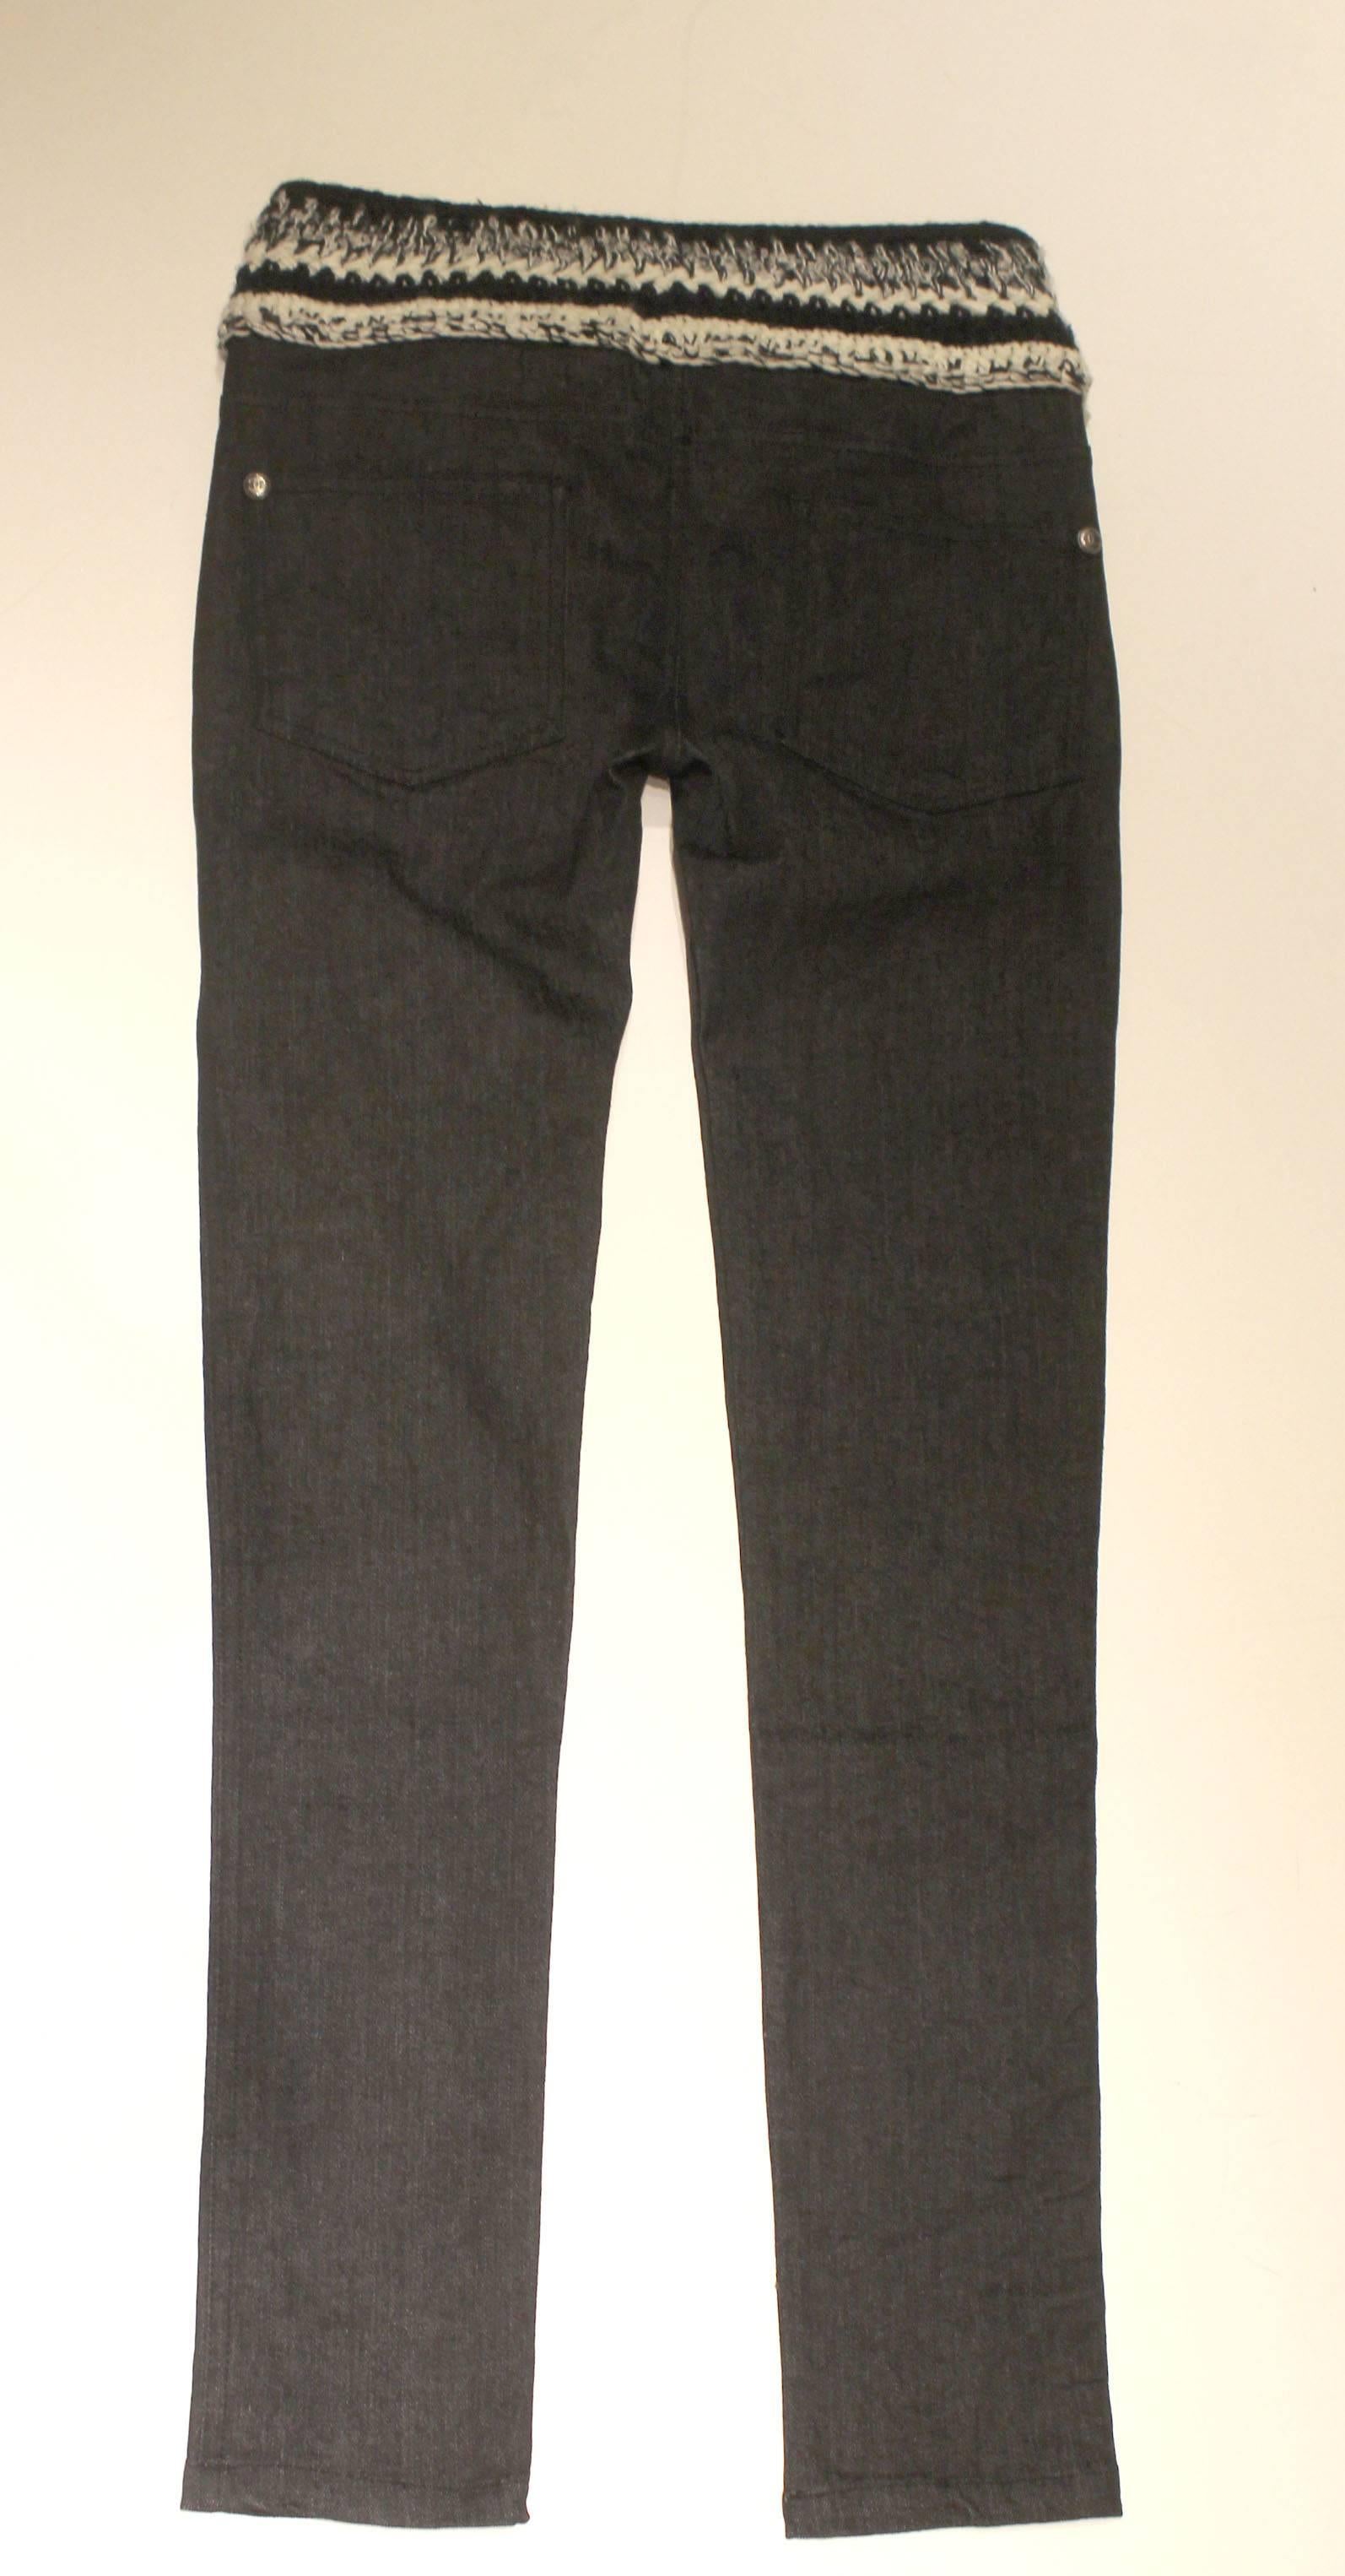 Women's or Men's Chanel Denim Jean with Cashmere Knit Waist For Sale